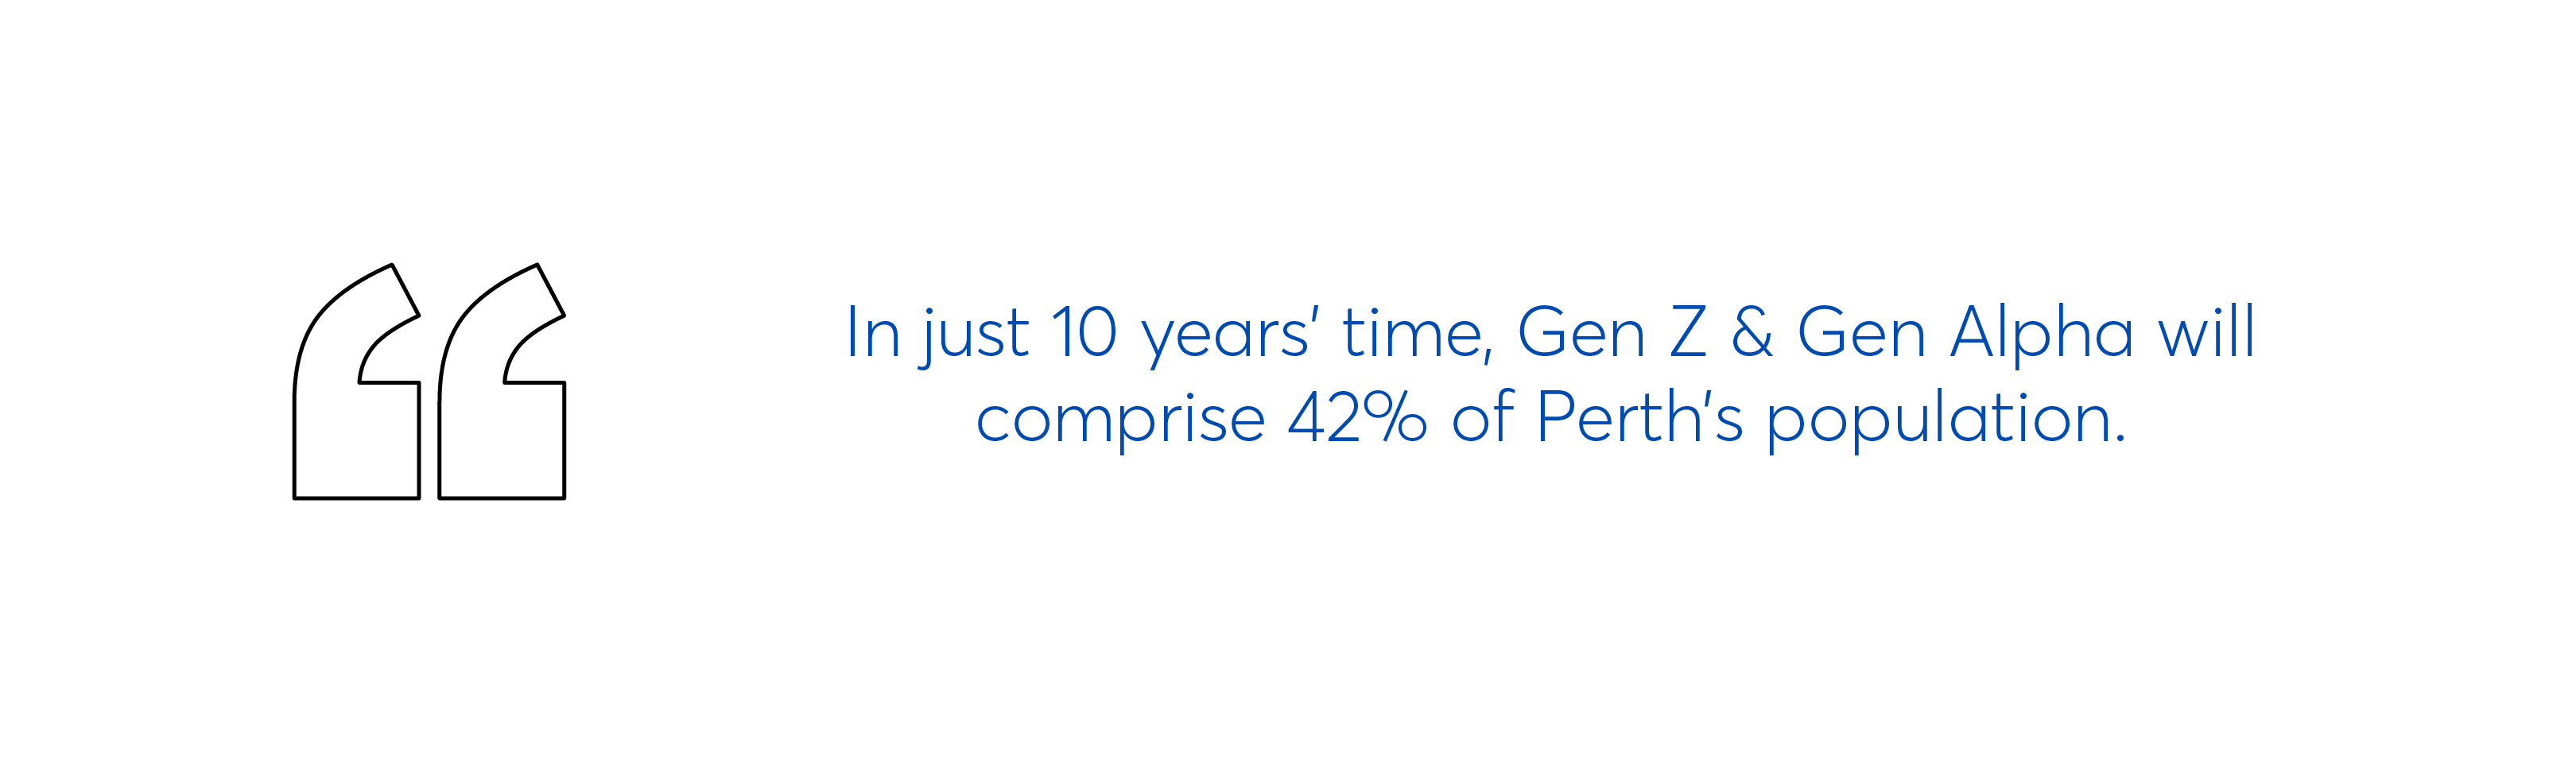 10 yrs Gen Z and Alpha will be 42% of Perth